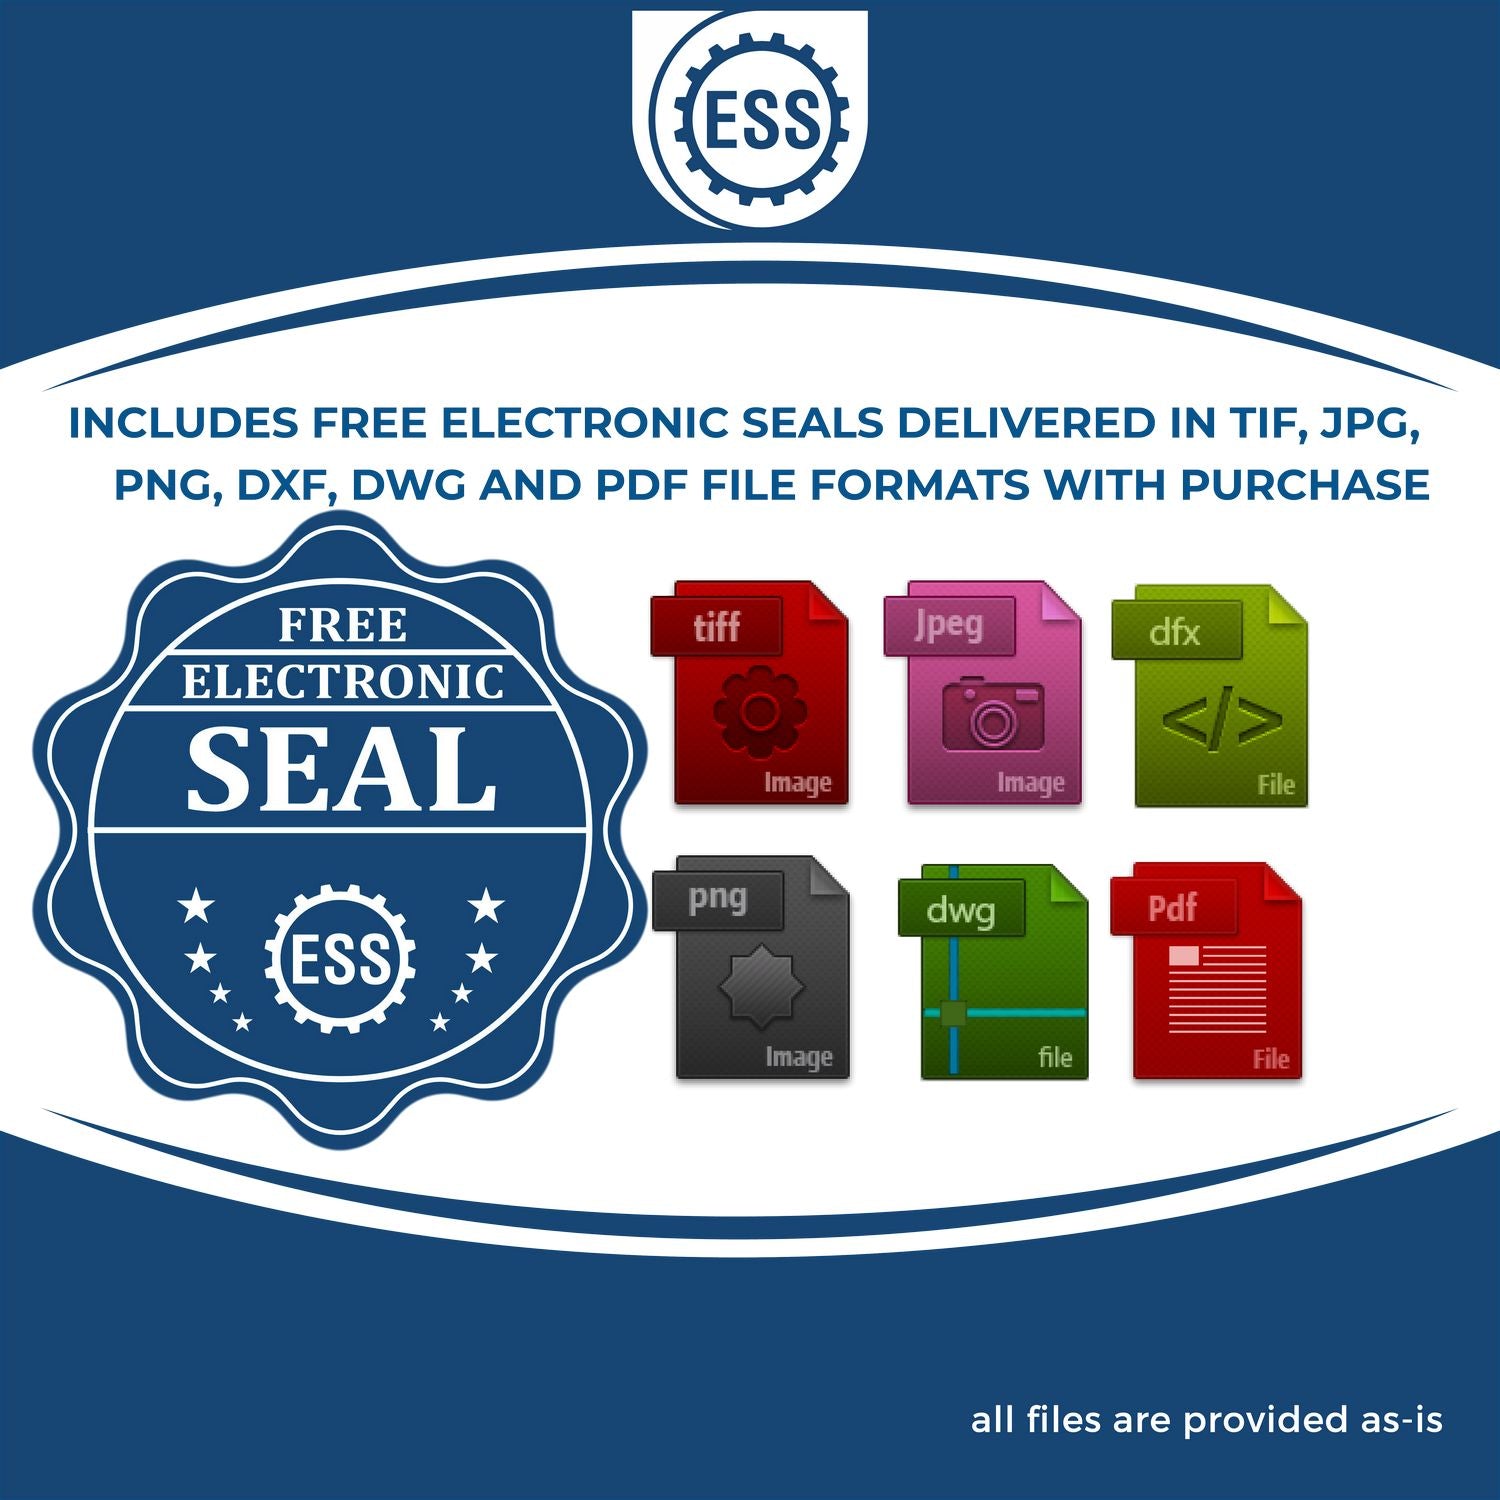 An infographic for the free electronic seal for the Oregon Engineer Desk Seal illustrating the different file type icons such as DXF, DWG, TIF, JPG and PNG.